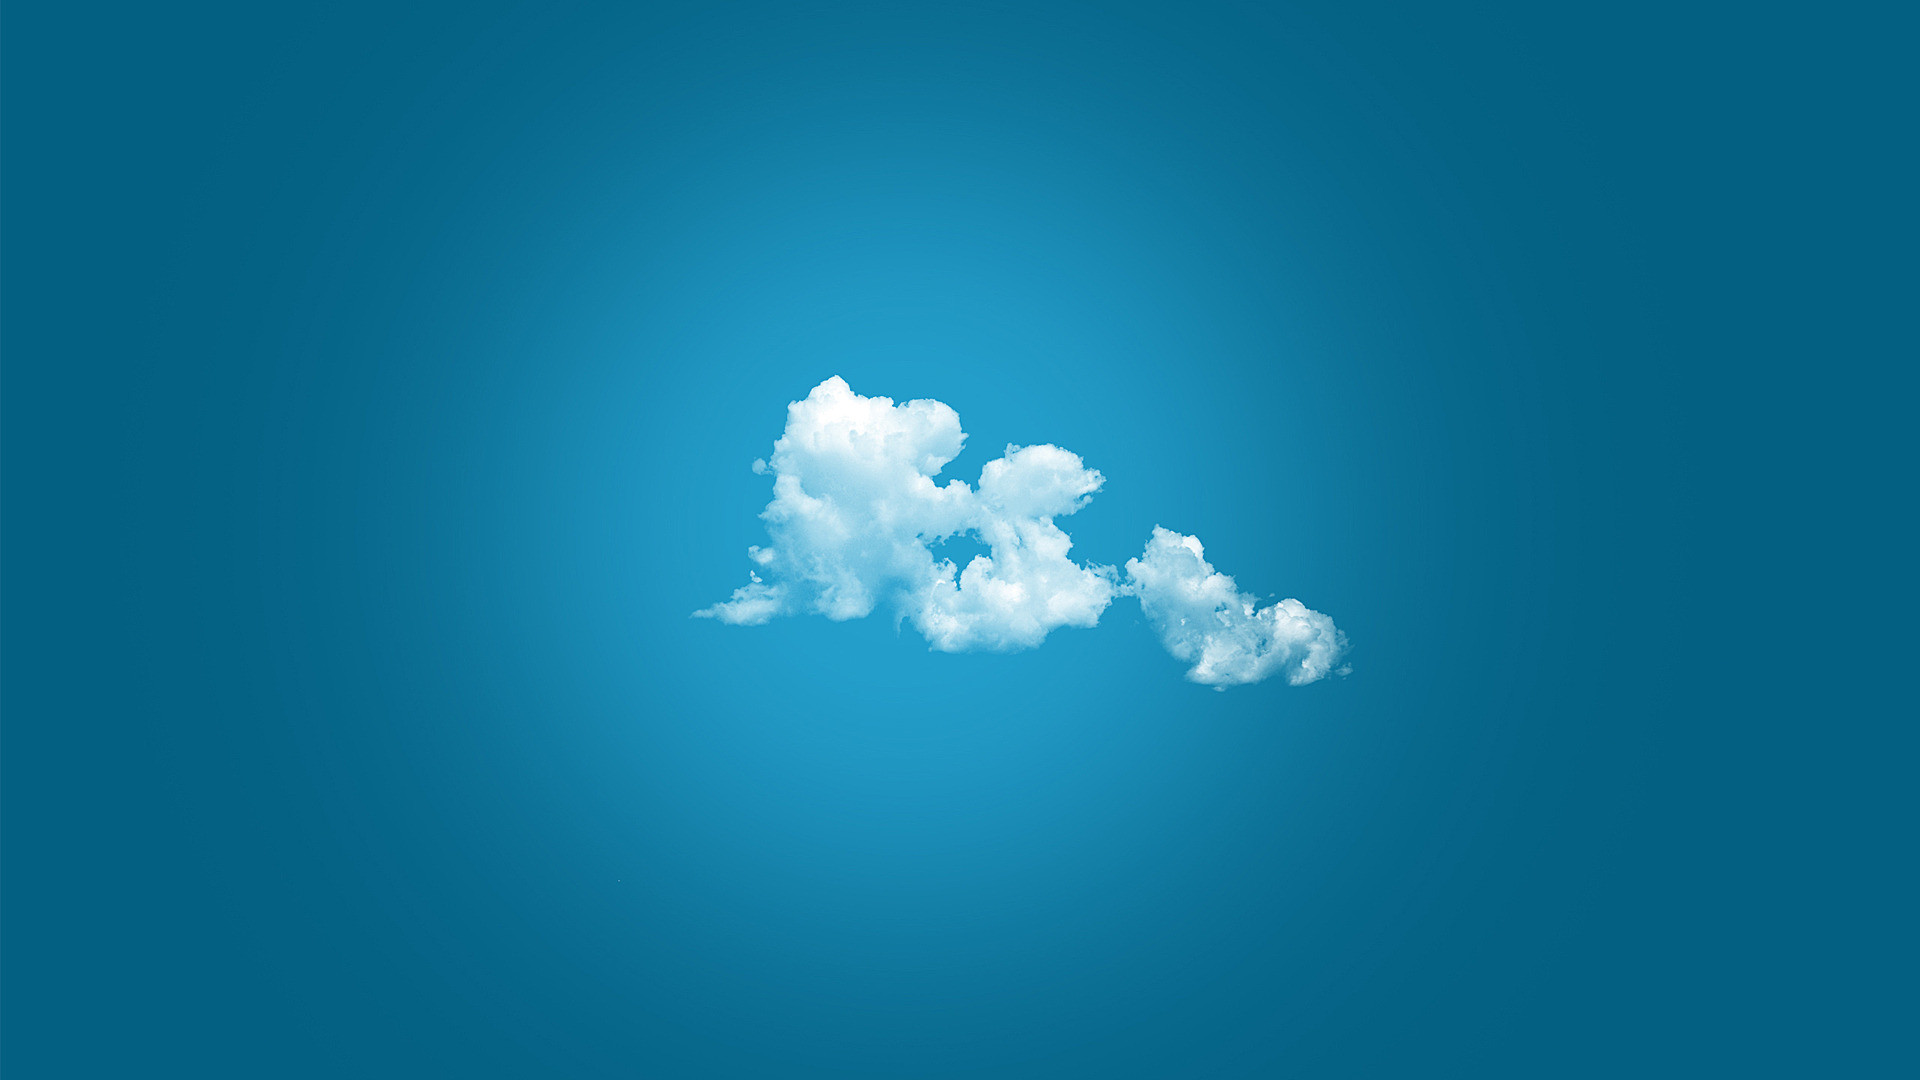 1920x1080 Free Clouds On Blue Background Wallpapers, Clouds On Blue Background  Pictures, Clouds On Blue Background Photos, Clouds On Blue Background  wallpaper